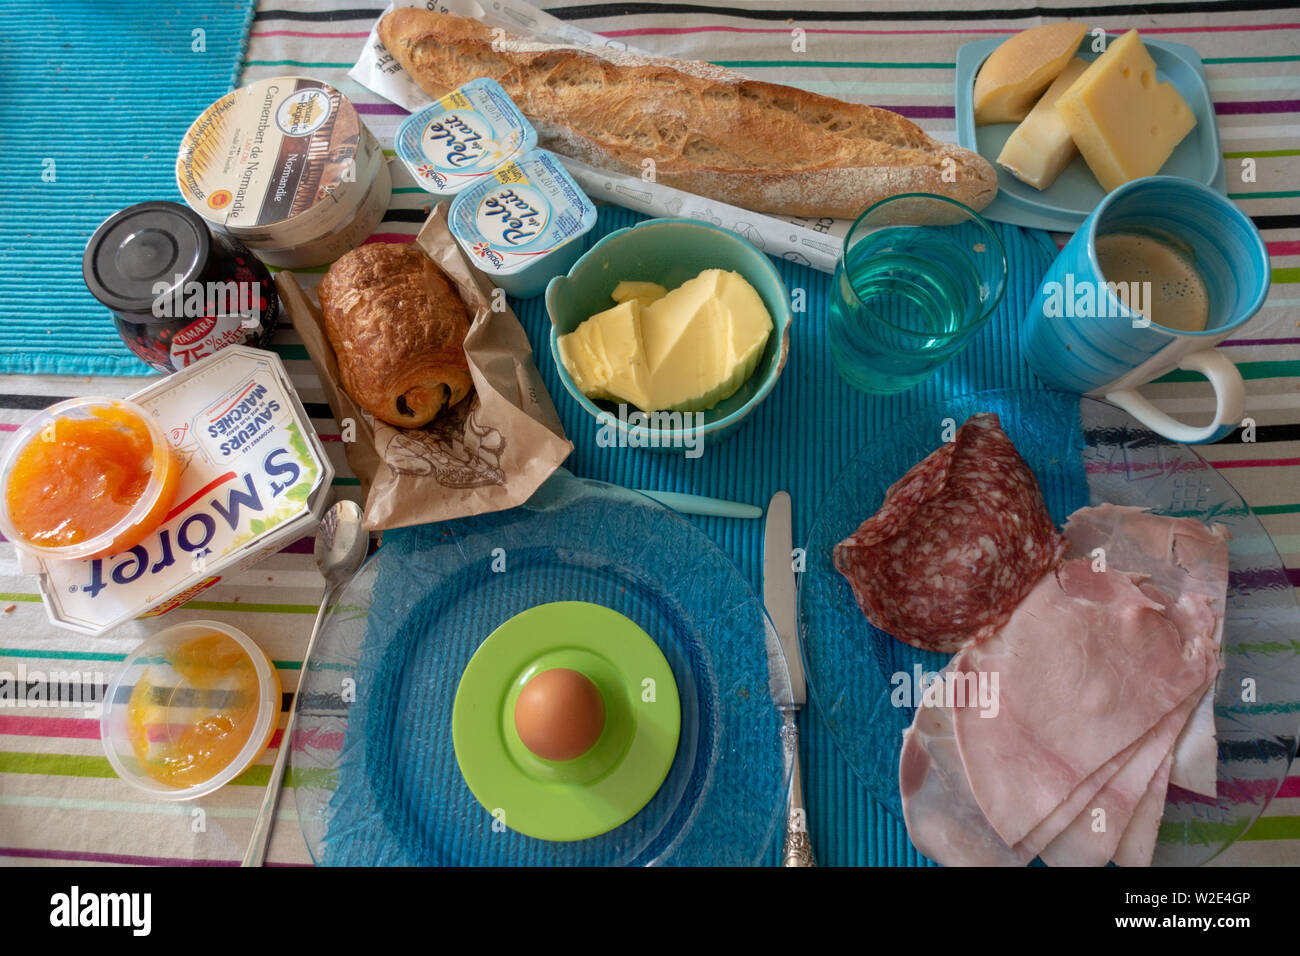 View from above of the many breakfast food choices laid at table breakfast setting Stock Photo